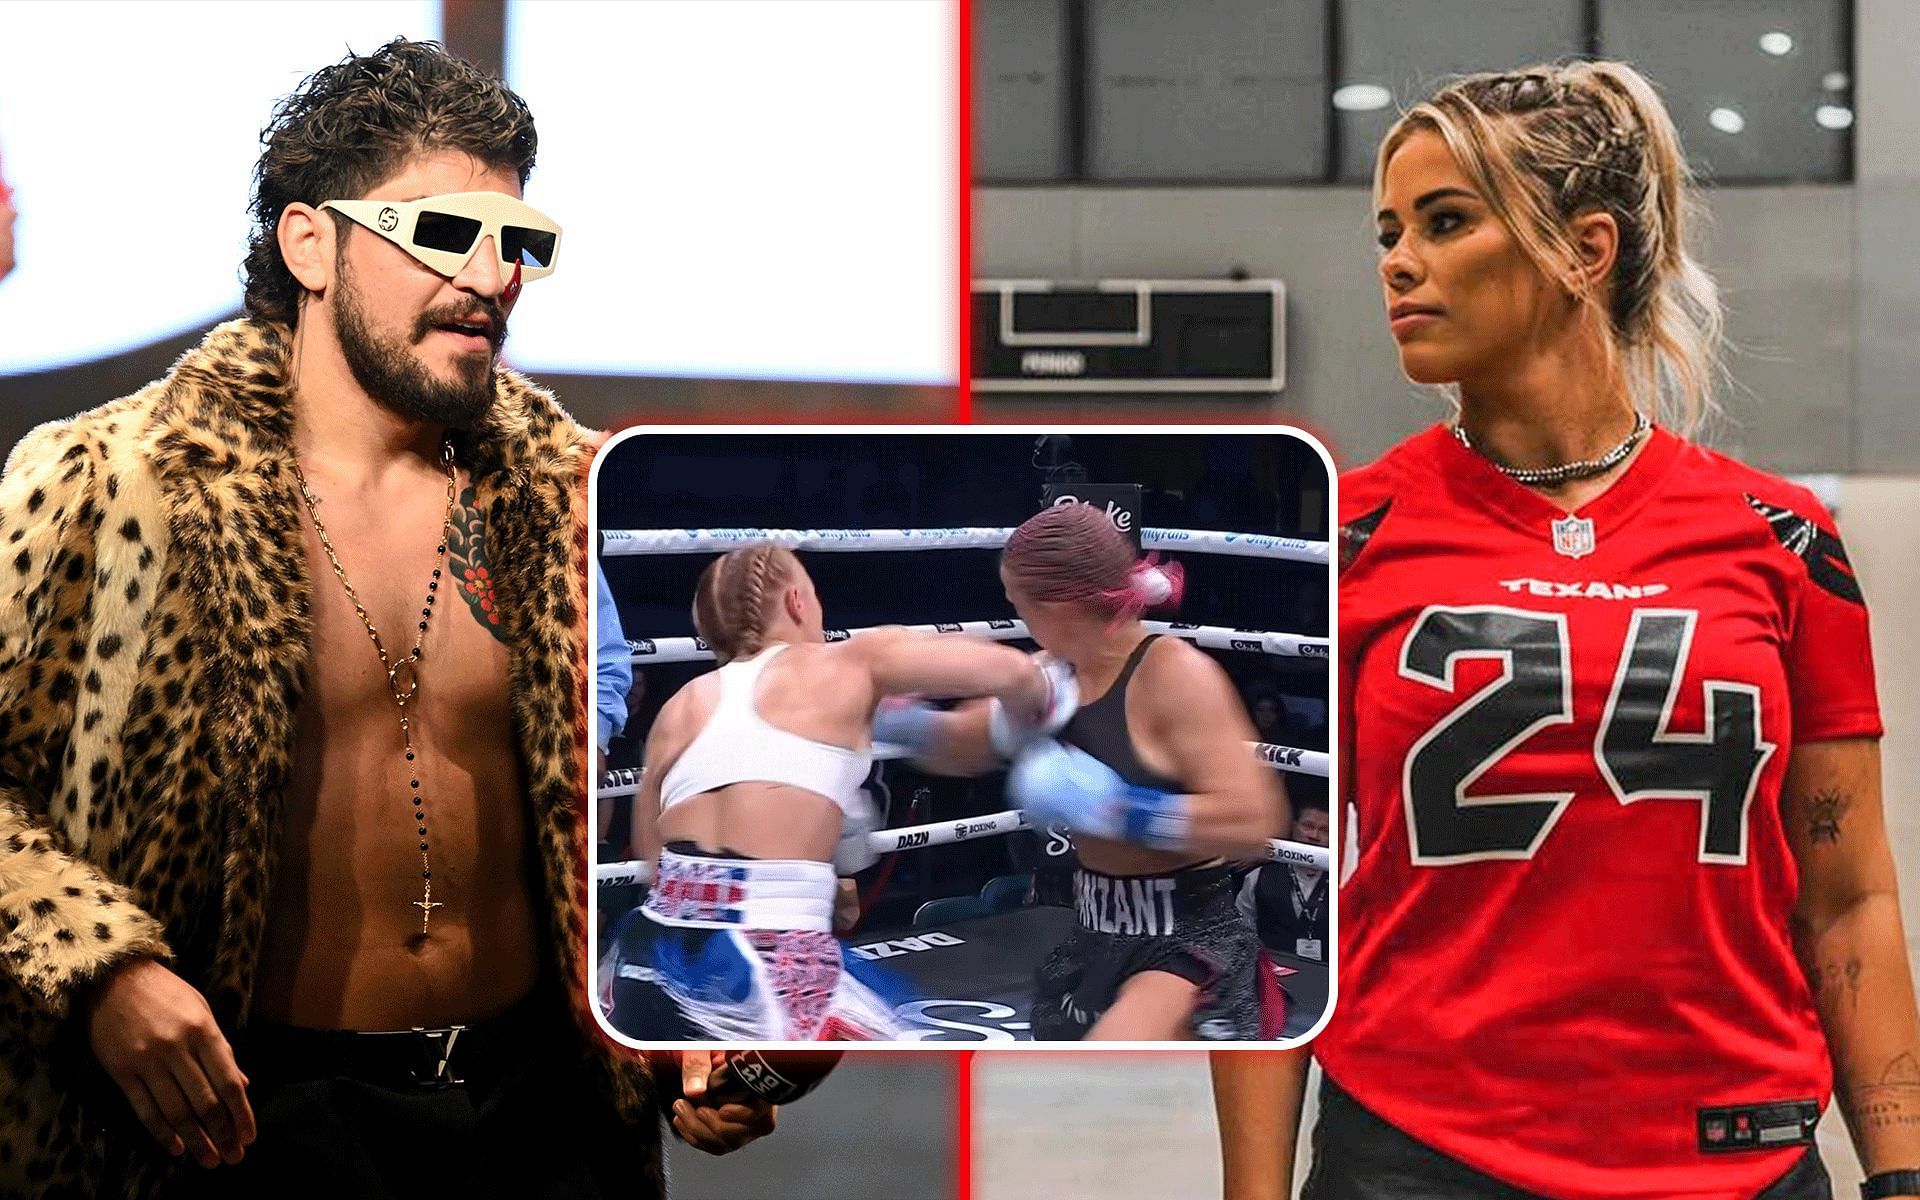 Dillon Danis has once again traded barbs with Paige VanZant. [Image courtesy: @paigevanzant and @mf_daznxseries on Instagram; Getty Images]